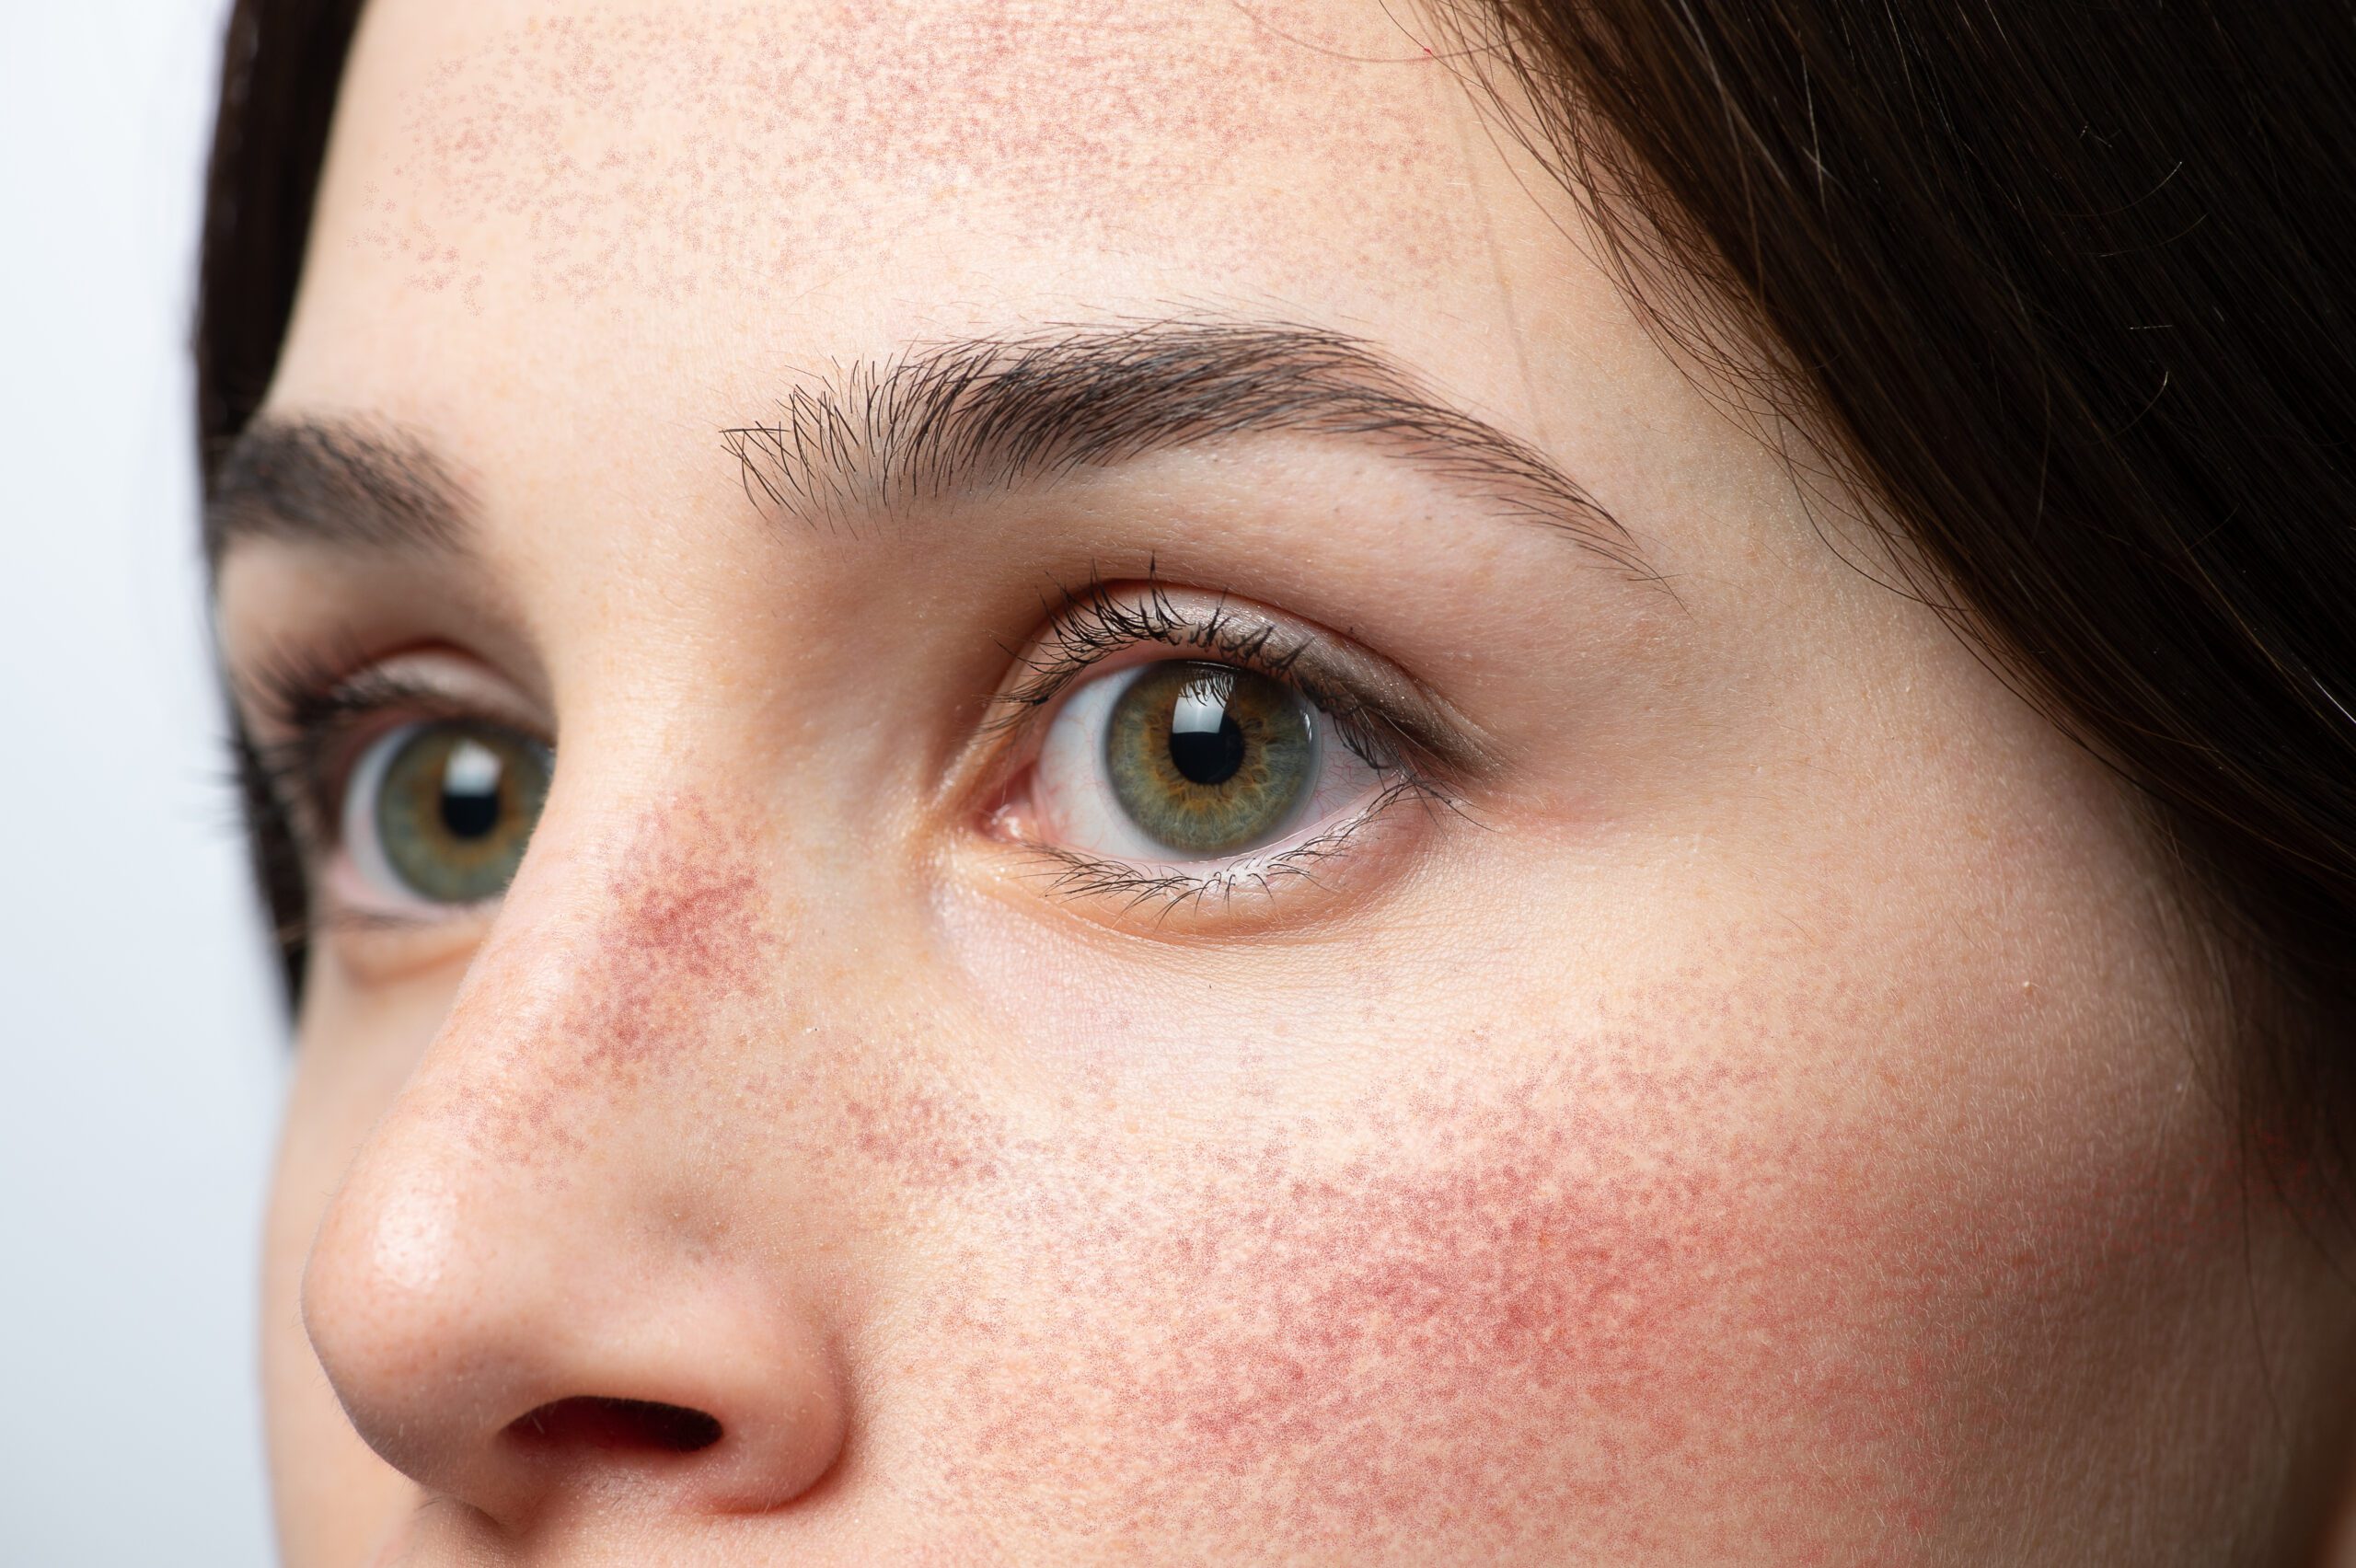 Face of a young woman with red cheeks suffering rosacea - by Dr. Tara O'Desky at The Rosacea Method .com